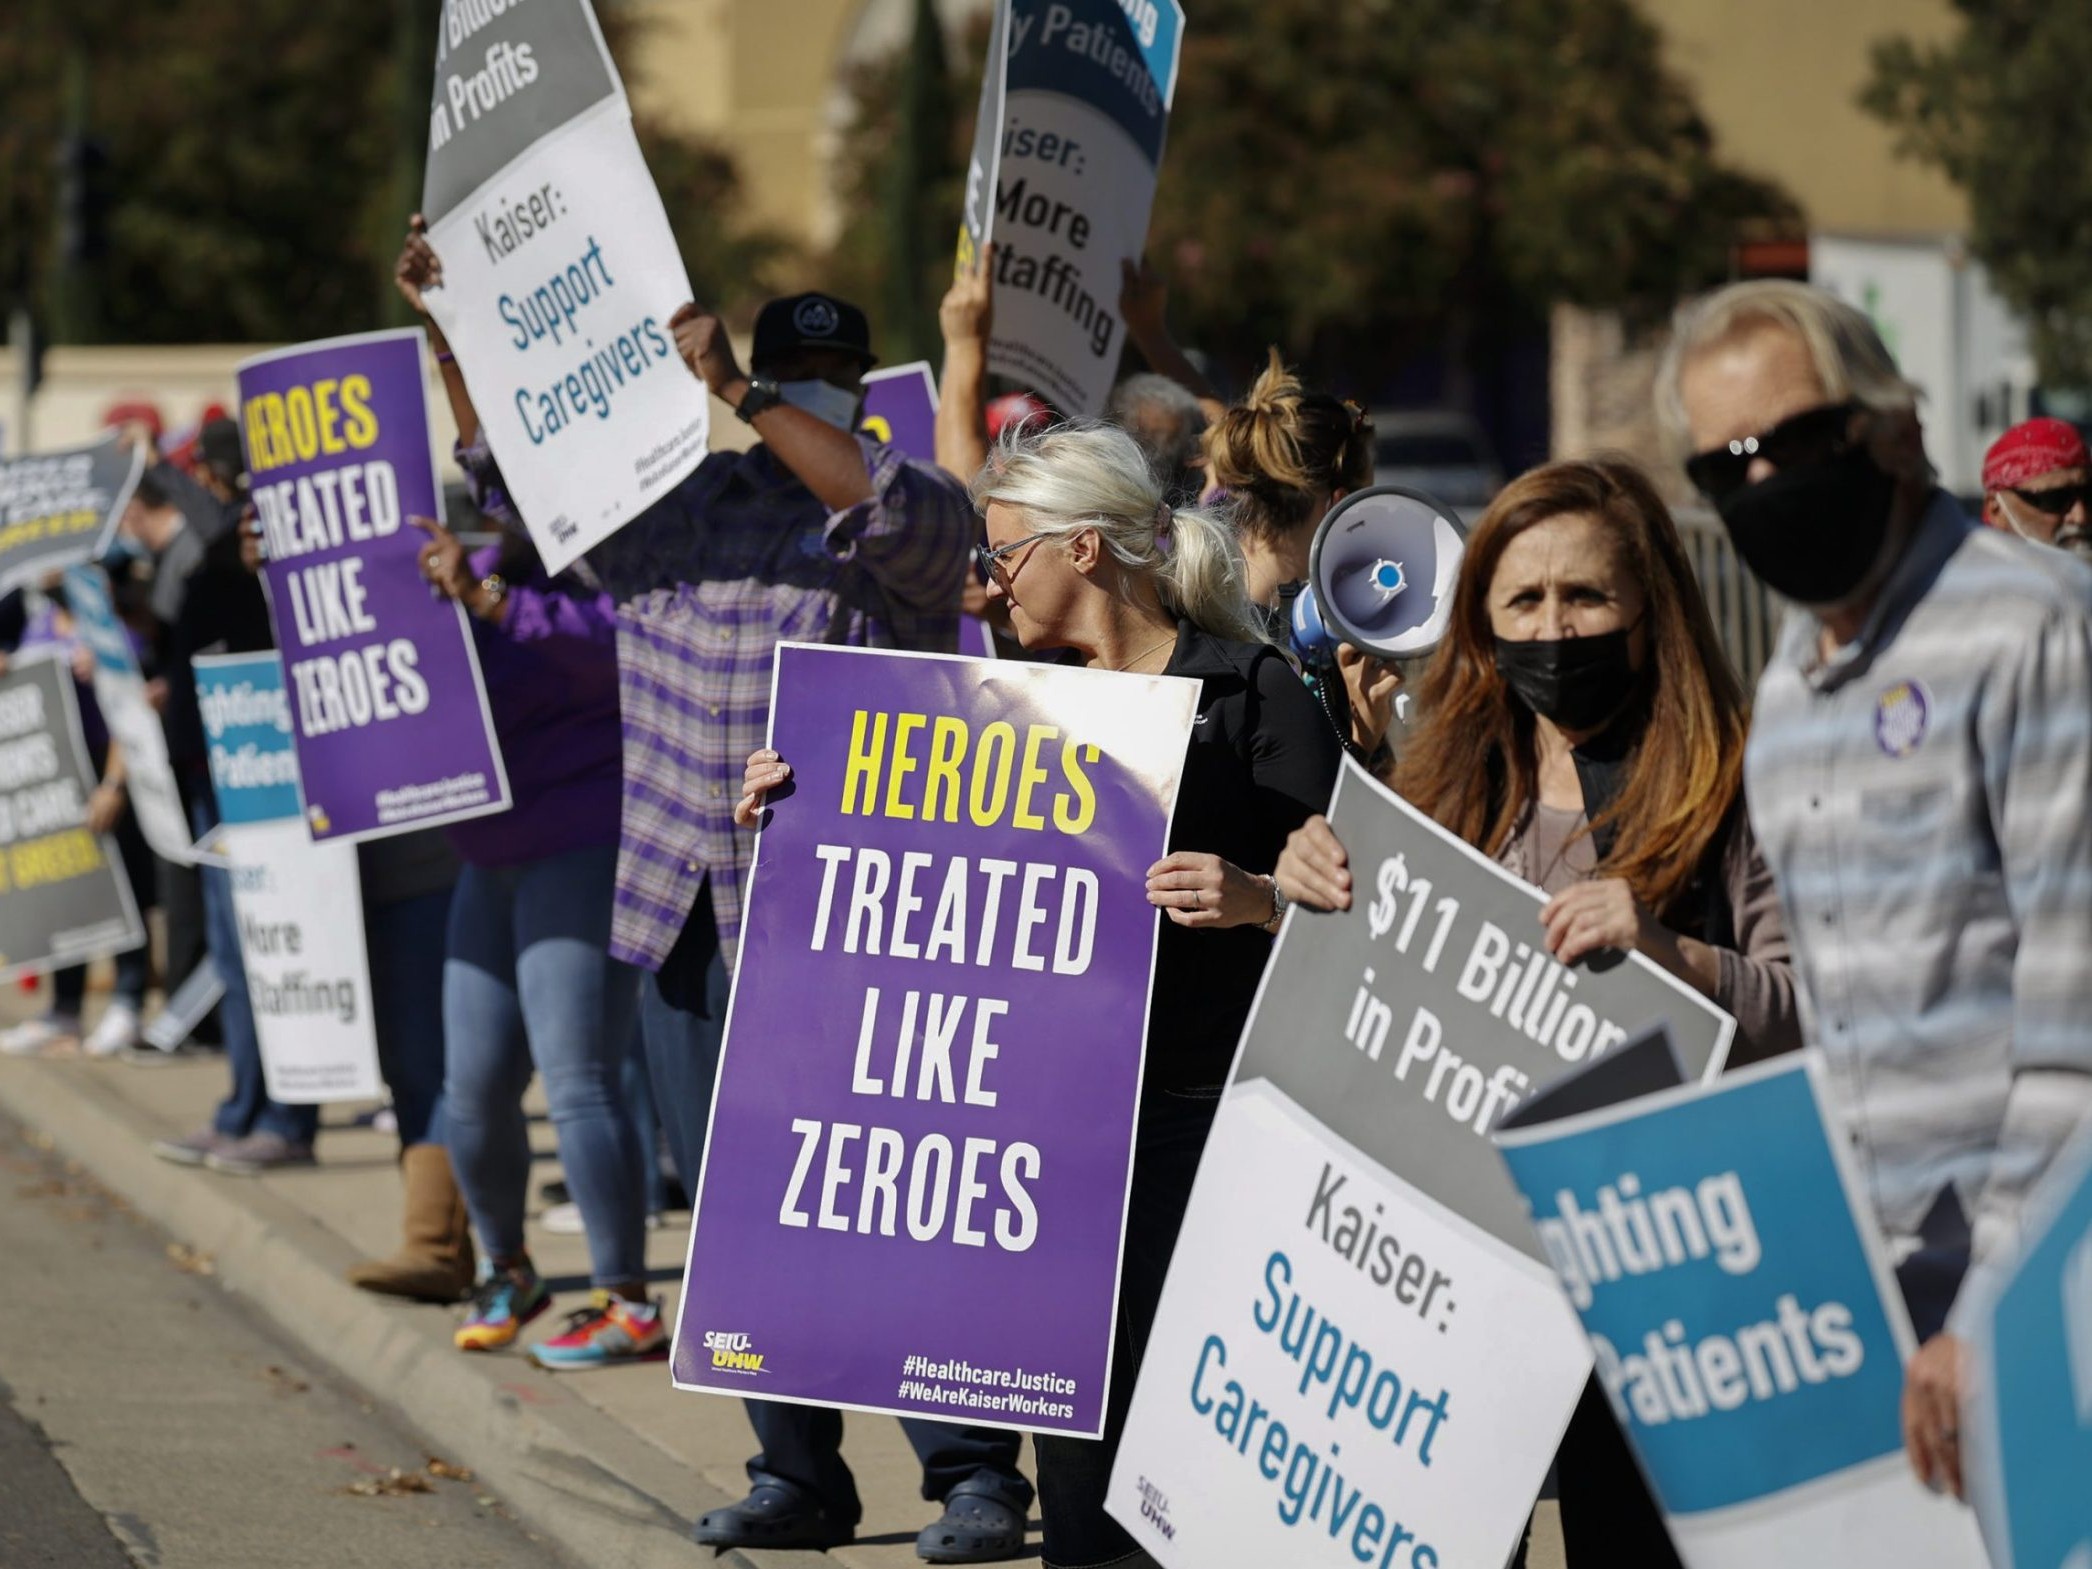 Kaiser healthcare unions say weeklong strike possible early next